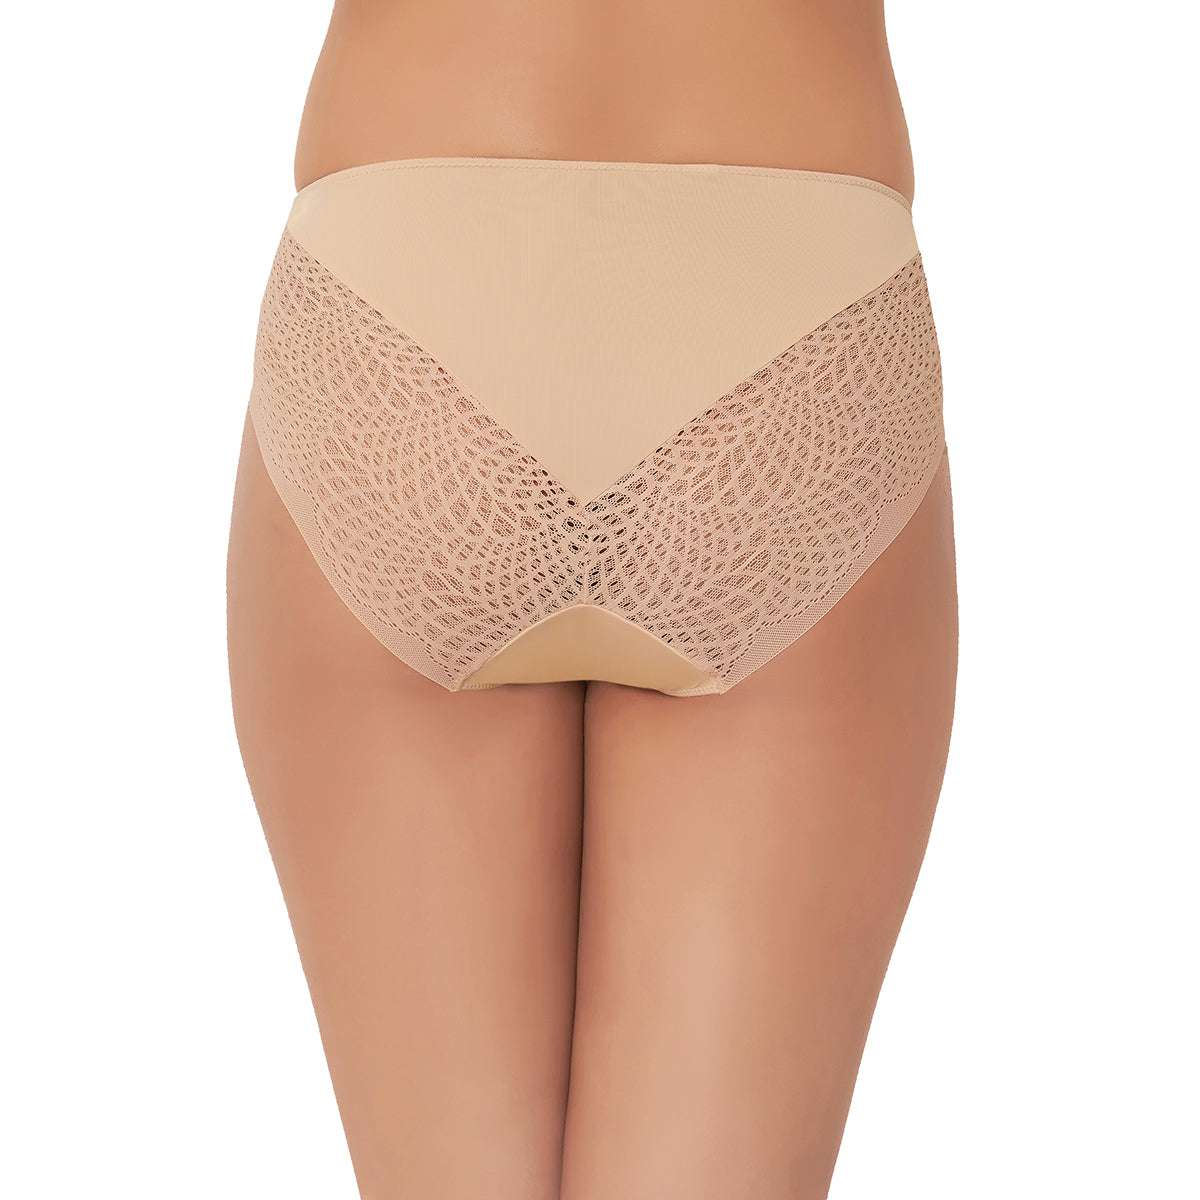 Nylon & cotton Period Panty (Broad lace waistband, Hipster)